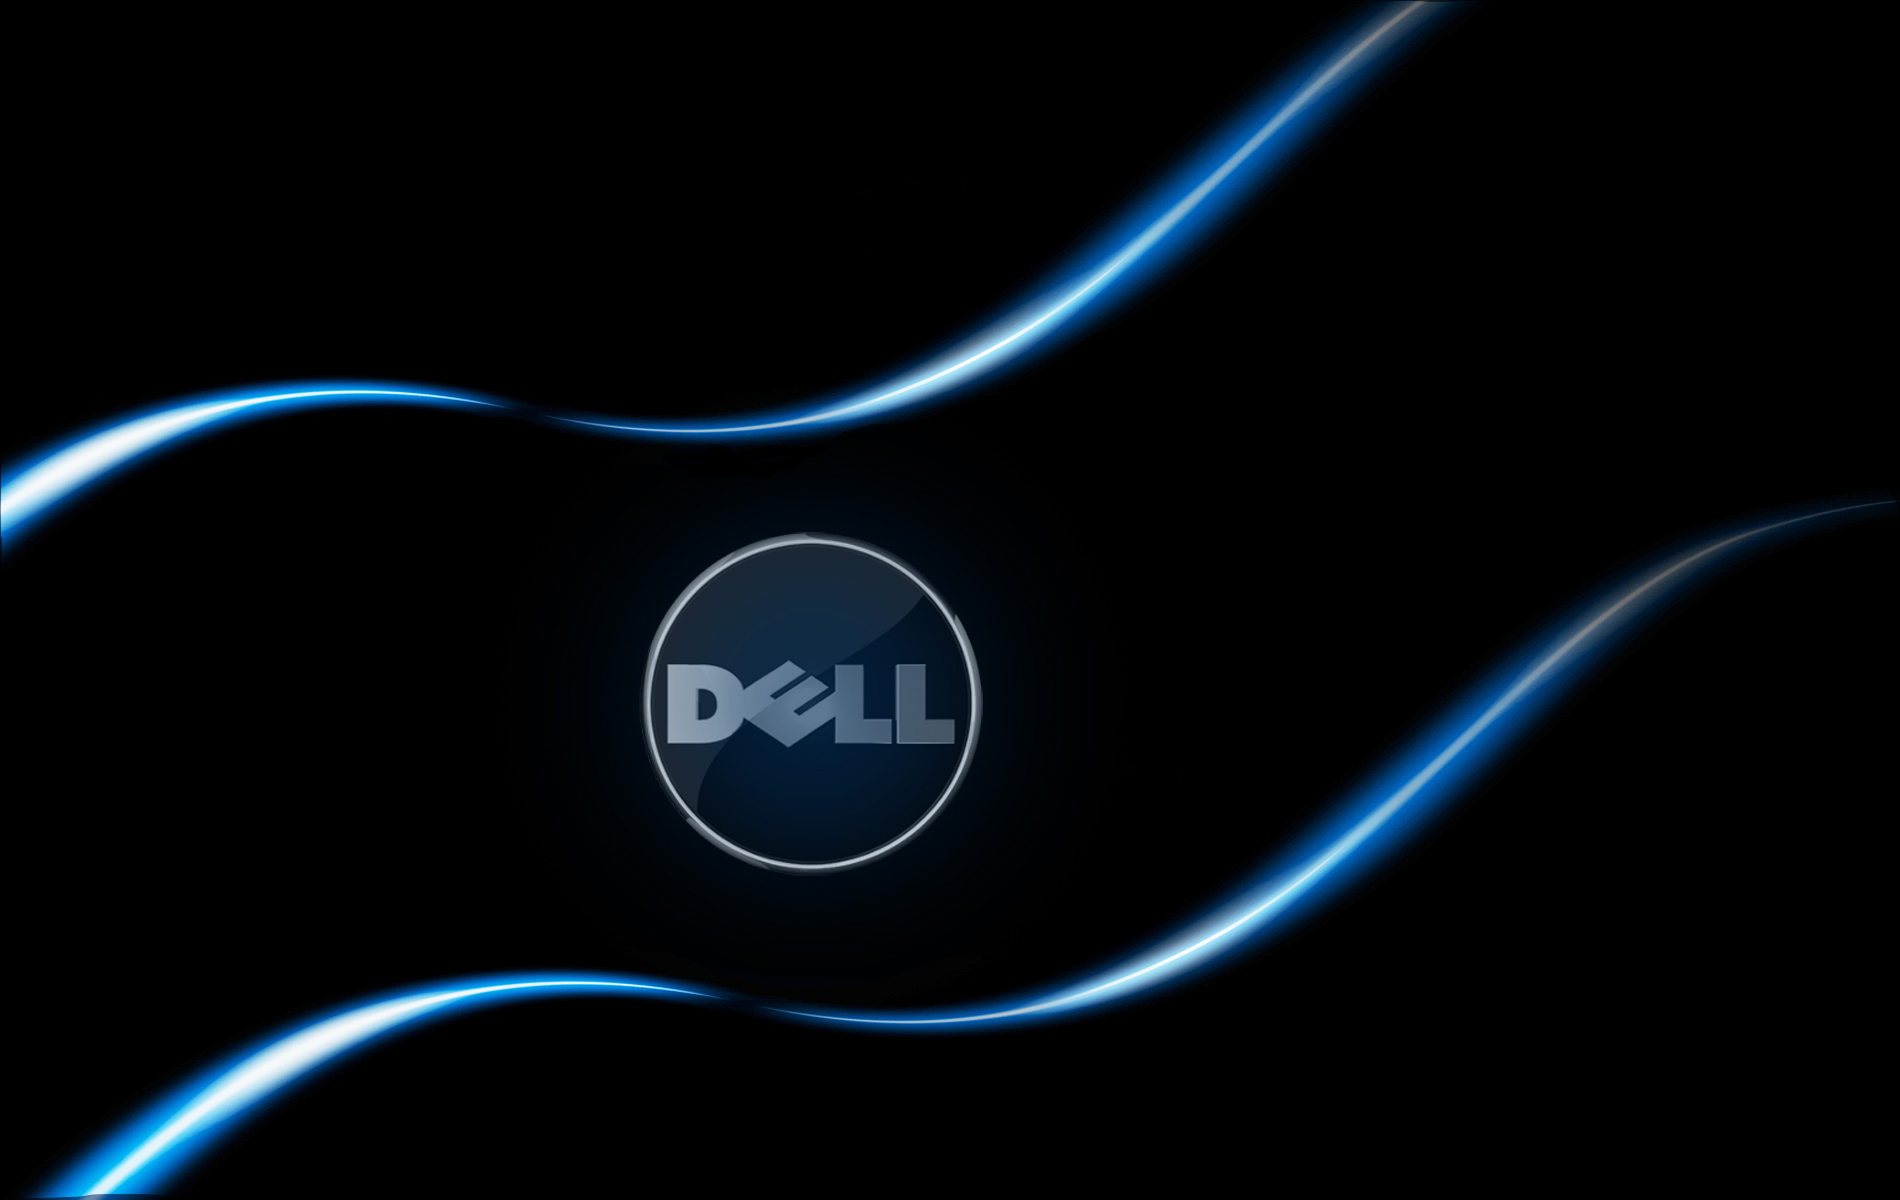 Free Download Hd Dell Backgrounds Dell Wallpaper Images For Windows 1900x10 For Your Desktop Mobile Tablet Explore 49 Dell Windows 7 Wallpaper Download Dell Windows 7 Desktop Wallpaper Dell